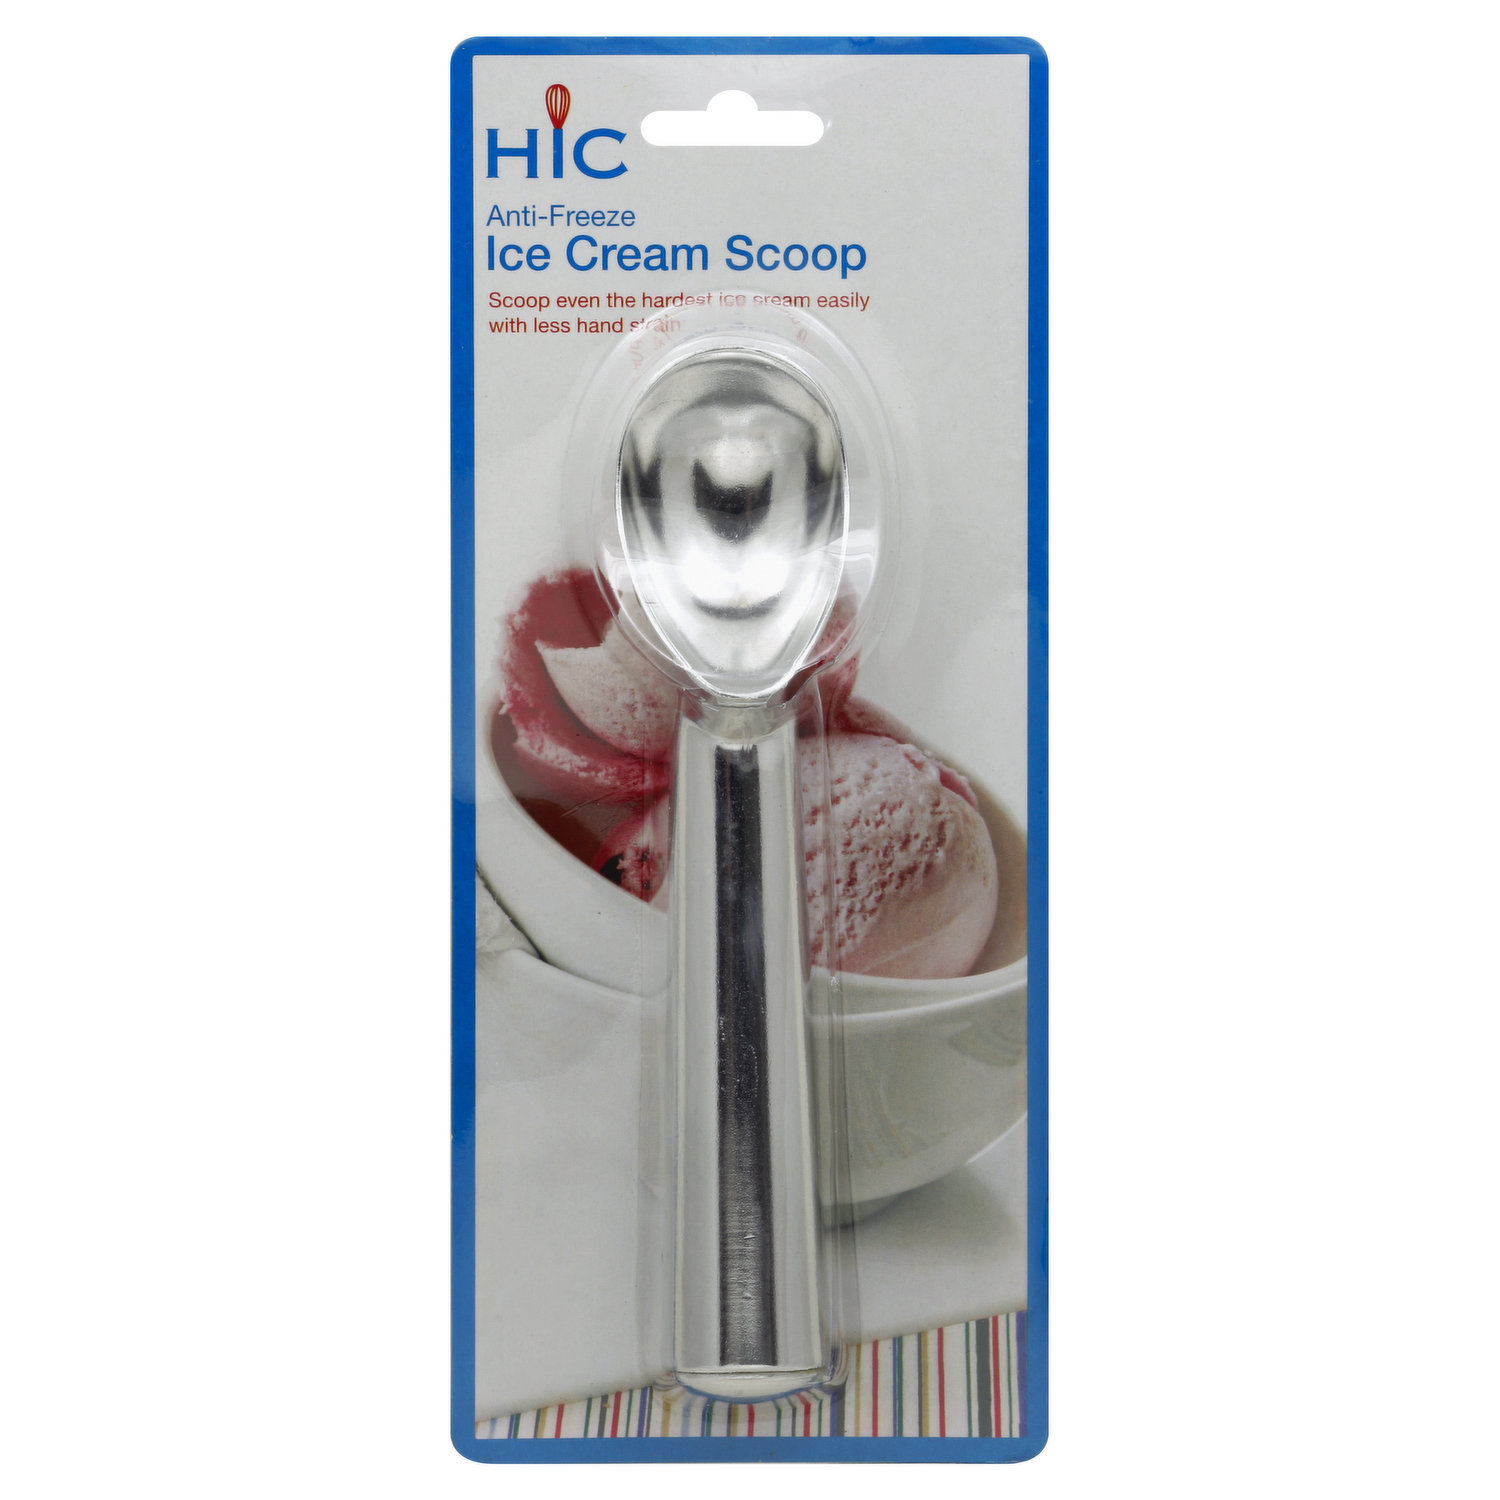 Stainless Steel Portion Scoop - Euro Kit (14 x scoops)